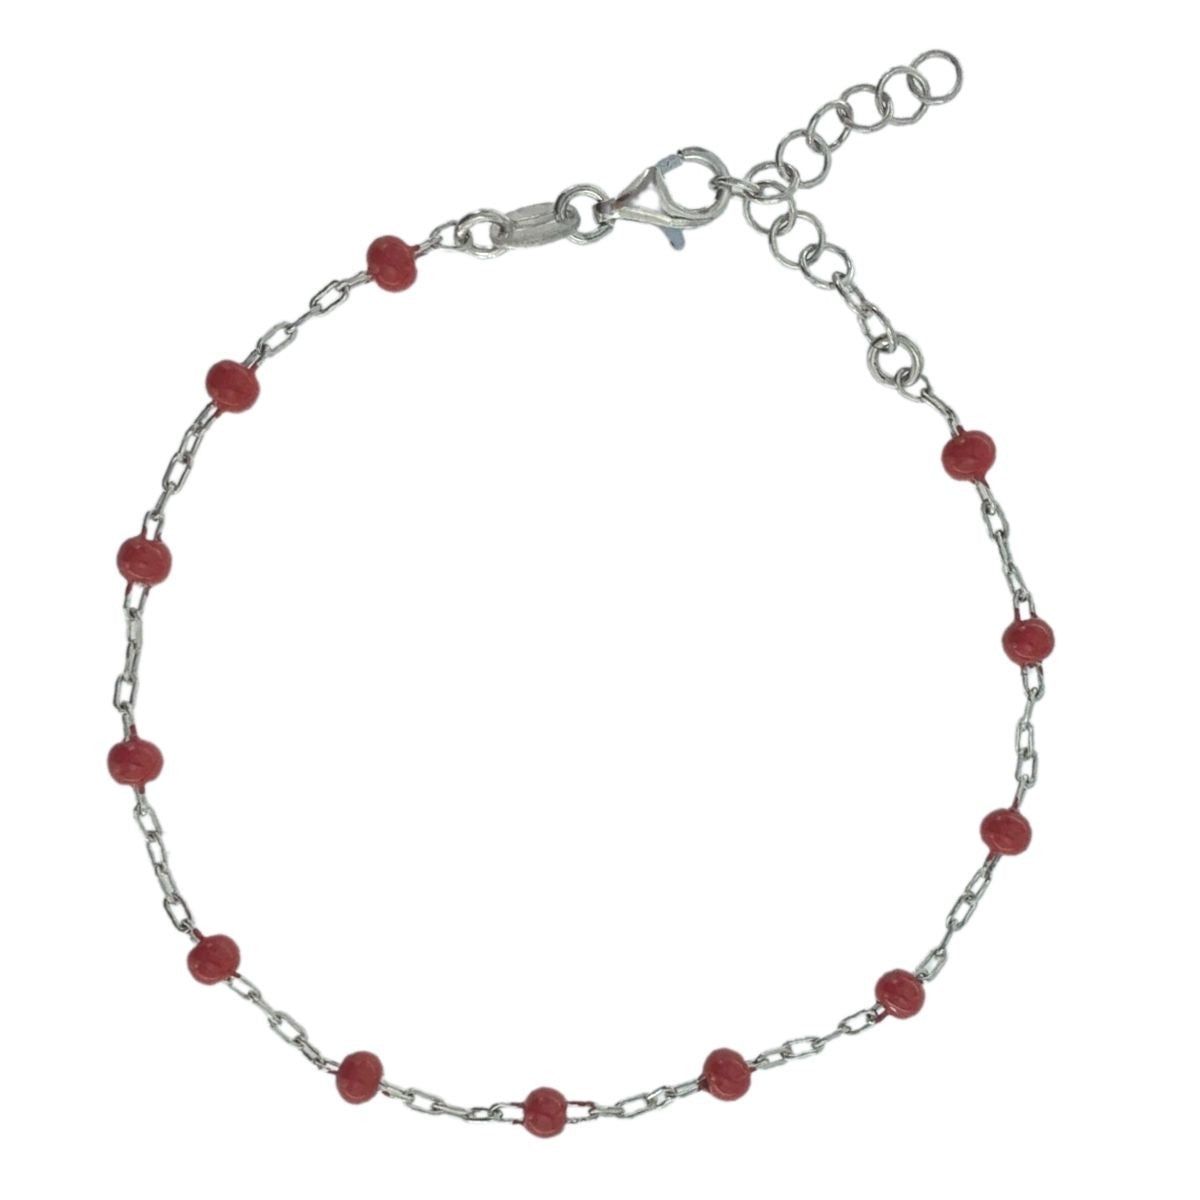 SILVER BRACELET AND RED BALLS